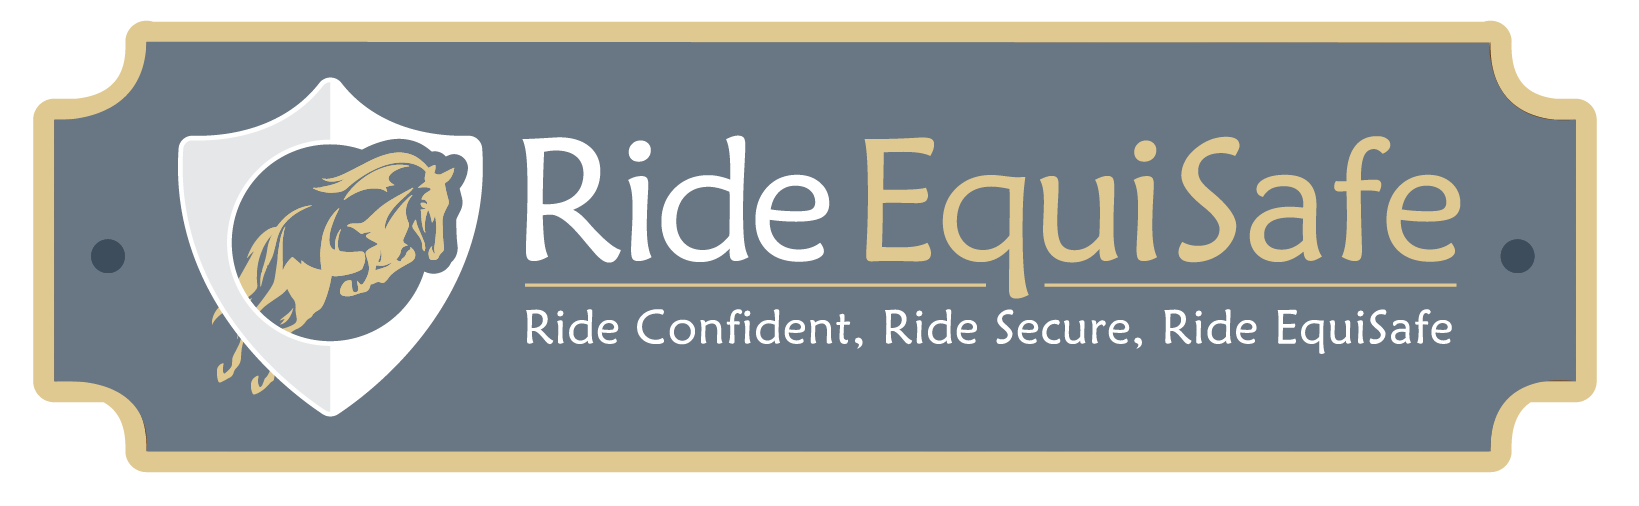 Ride EquiSafe